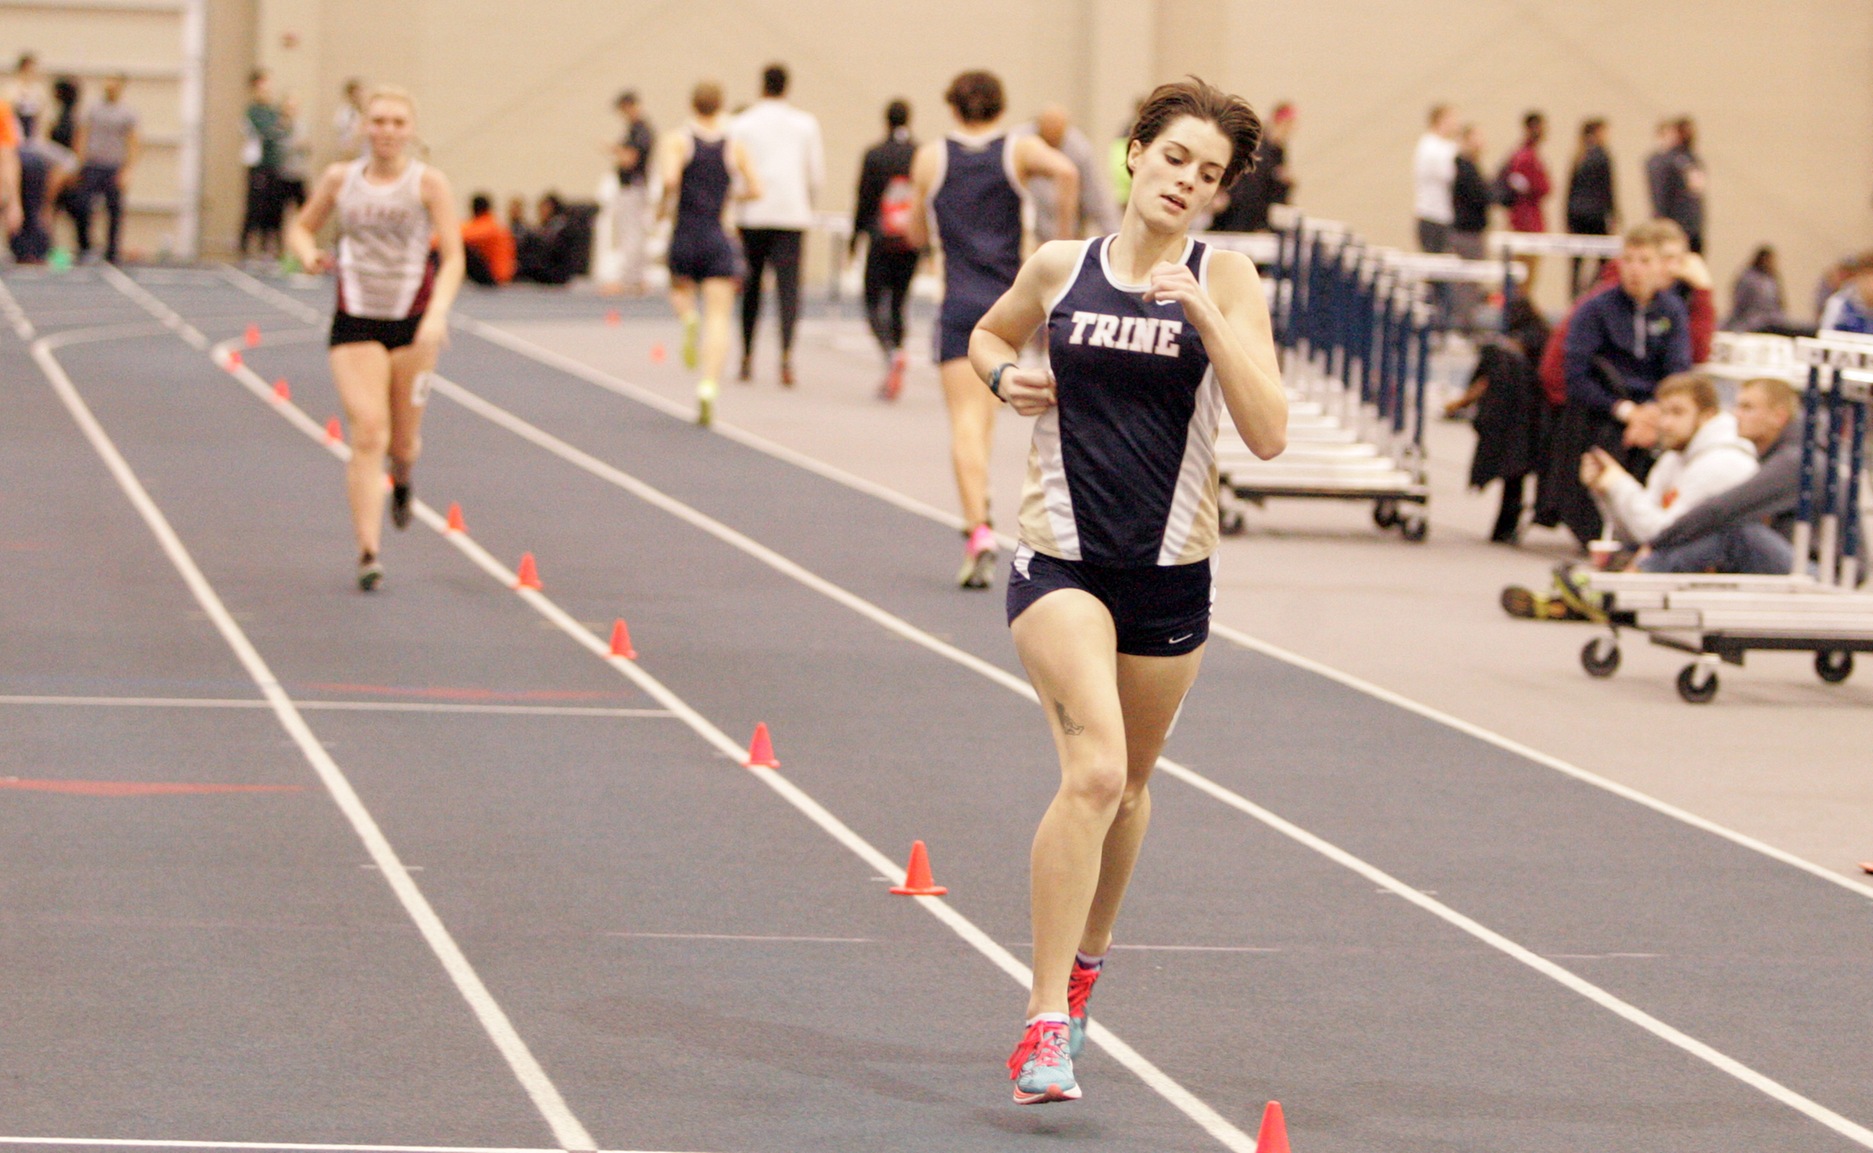 Trine Women Compete at Ball State Challenge